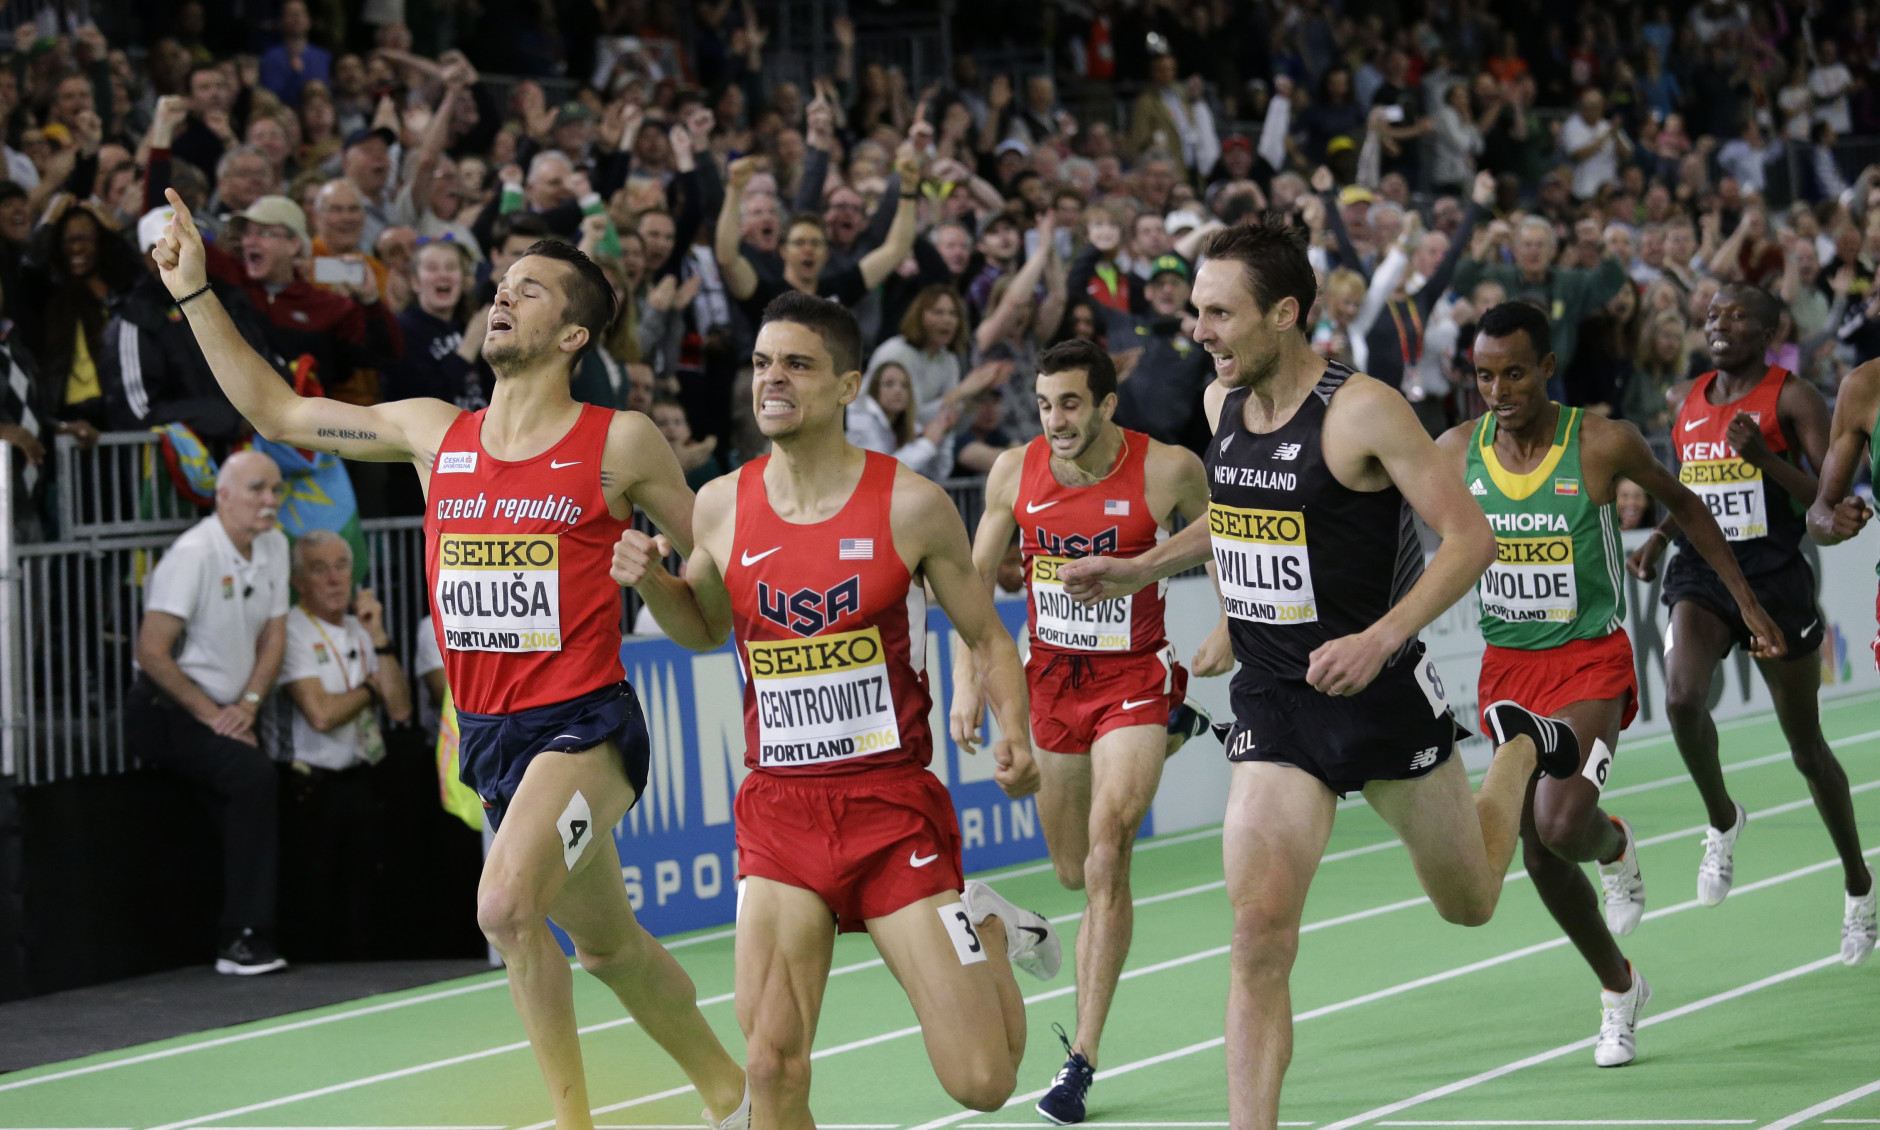 United States' Matthew Centrowitz, second from left, wins the men's 1500-meter run final during the World Indoor Athletics Championships, Sunday, March 20, 2016, in Portland, Ore. Czech Republic's Jakub Holusa, left, finished second, and New Zealand's Nicholas Willis, right, finished third. (AP Photo/Elaine Thompson)